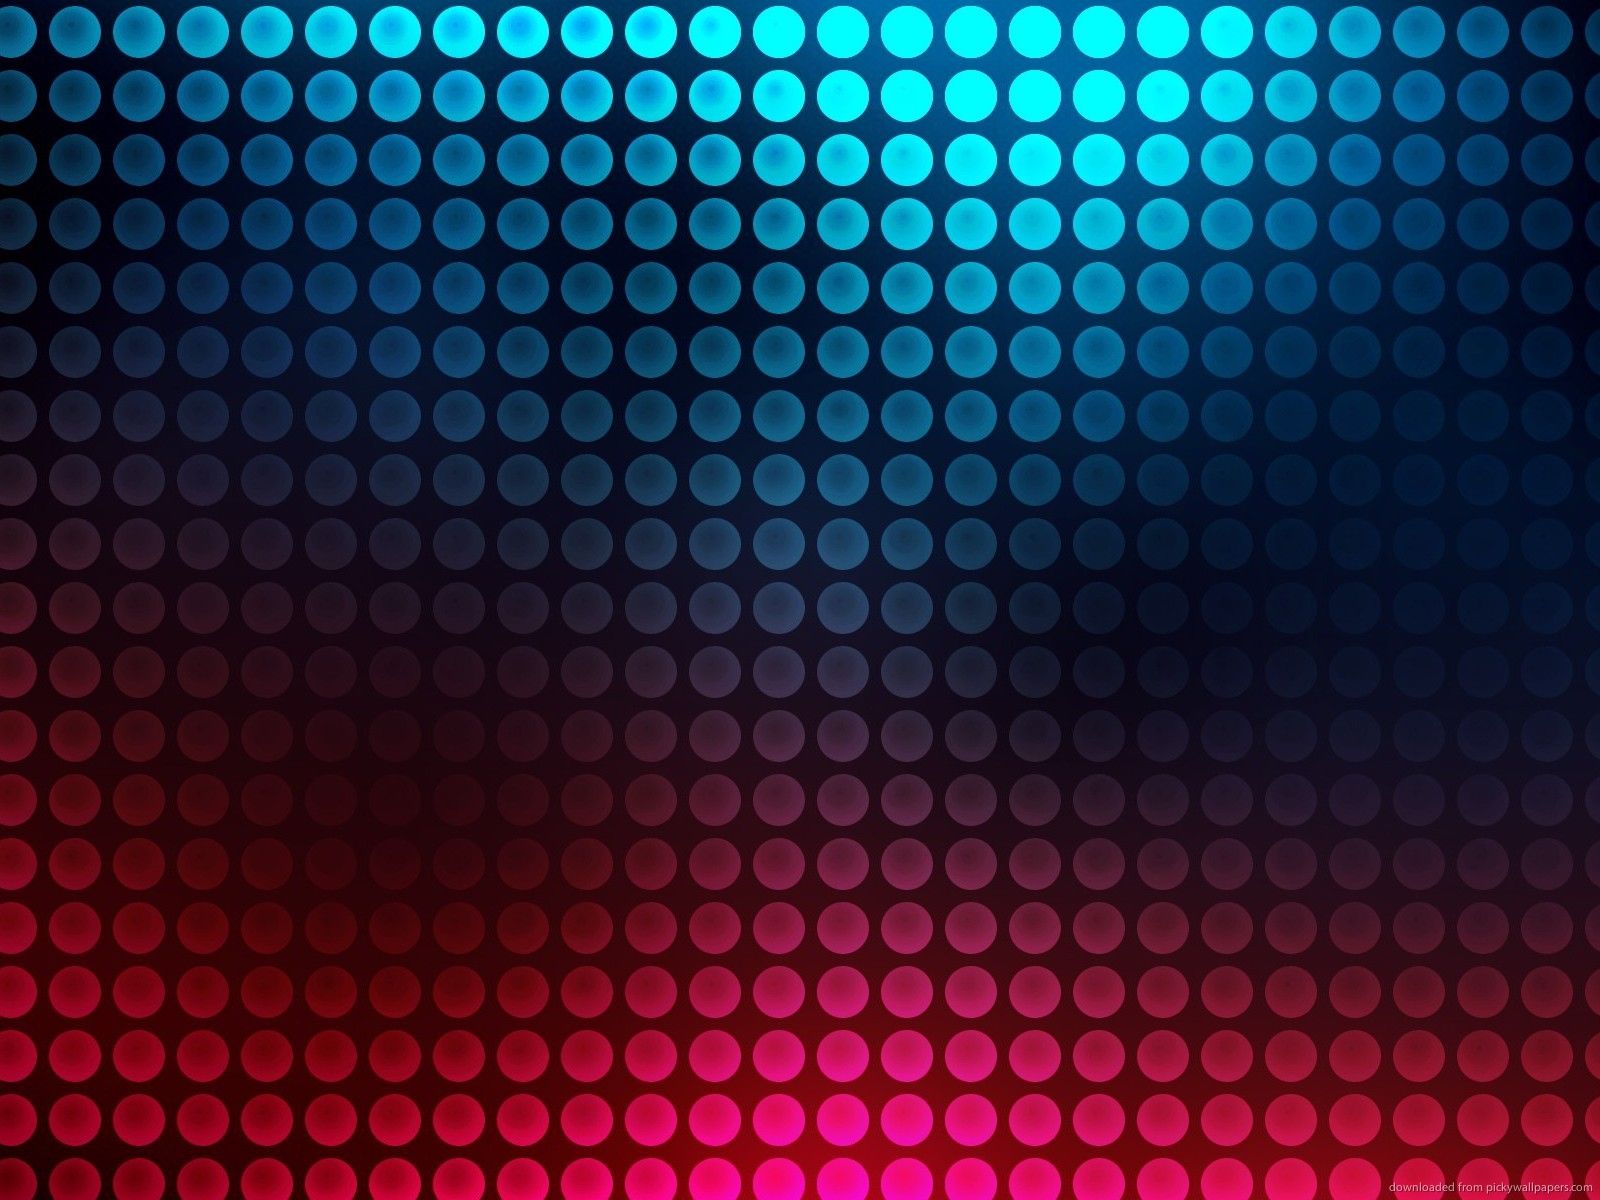 Download 1600x1200 Pink And Blue Gradient Spheres Wallpaper